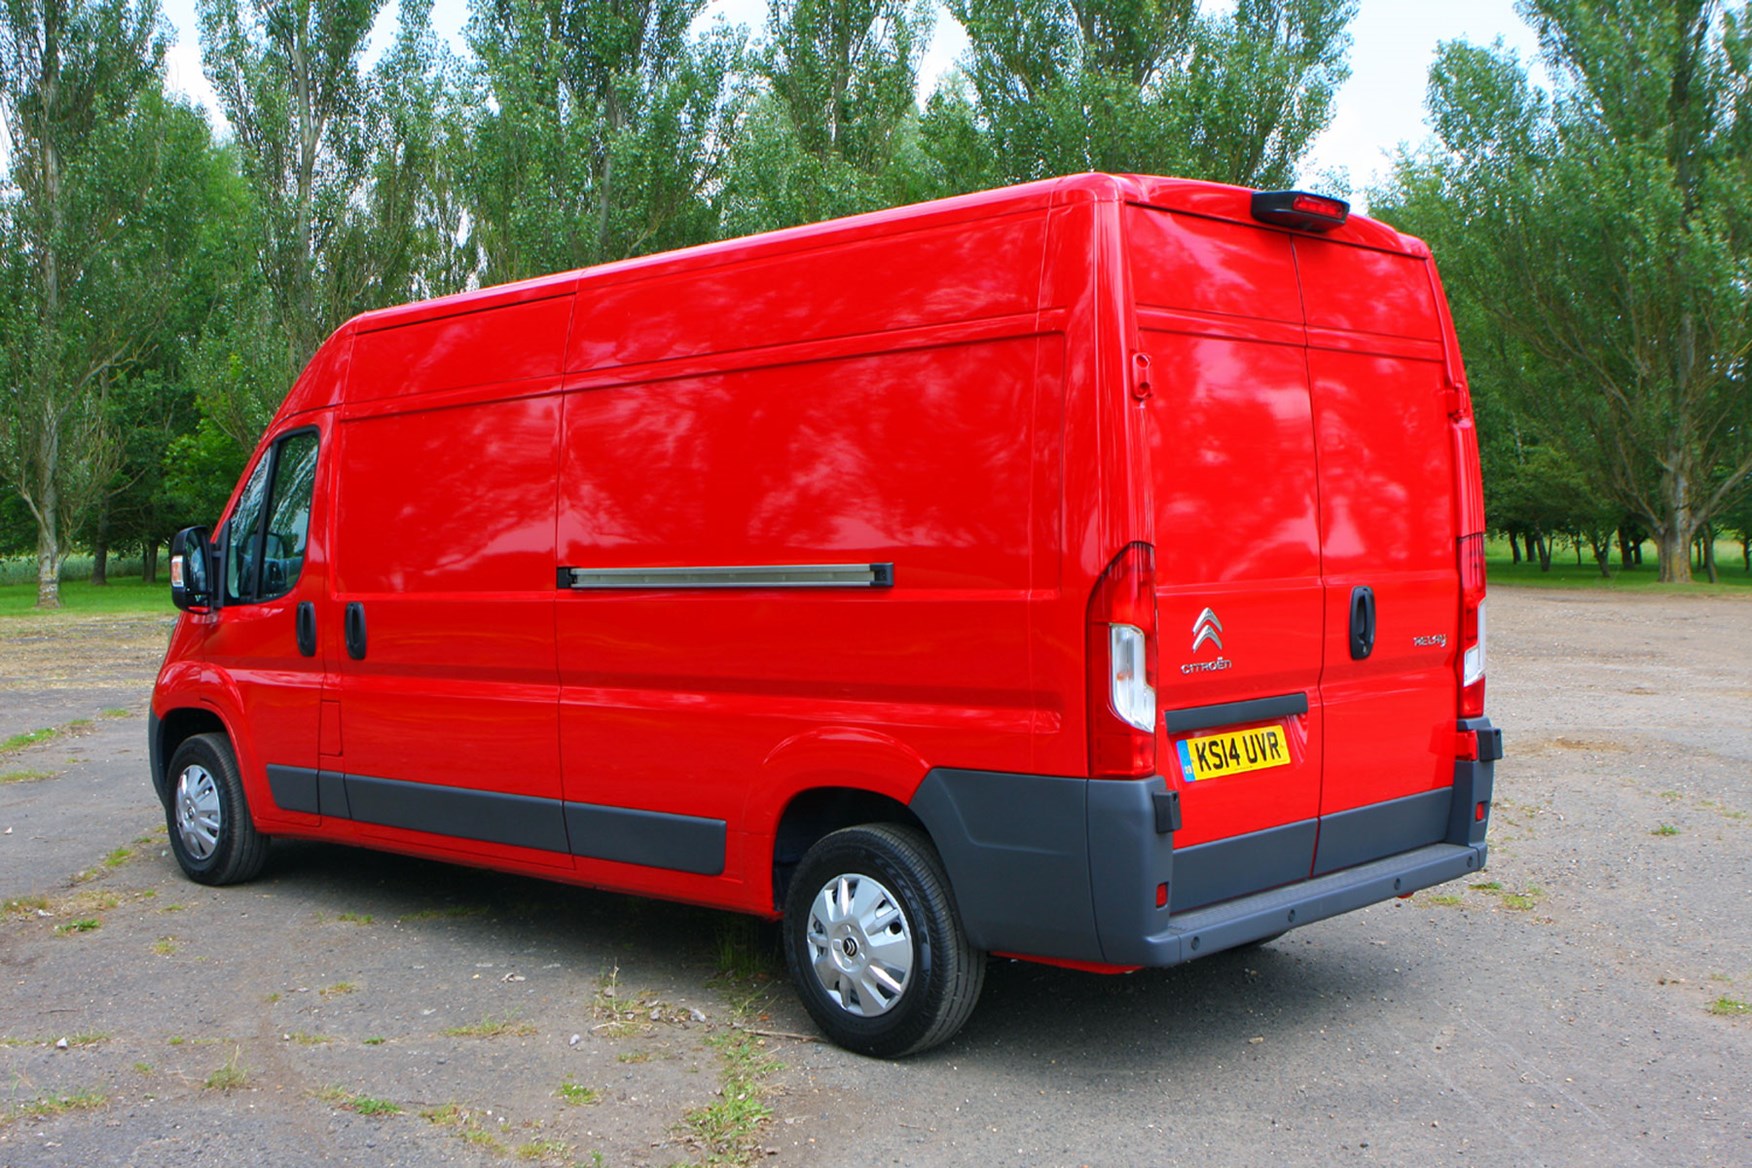 Citroen Relay 2.2 HDi 130 review - rear view, red